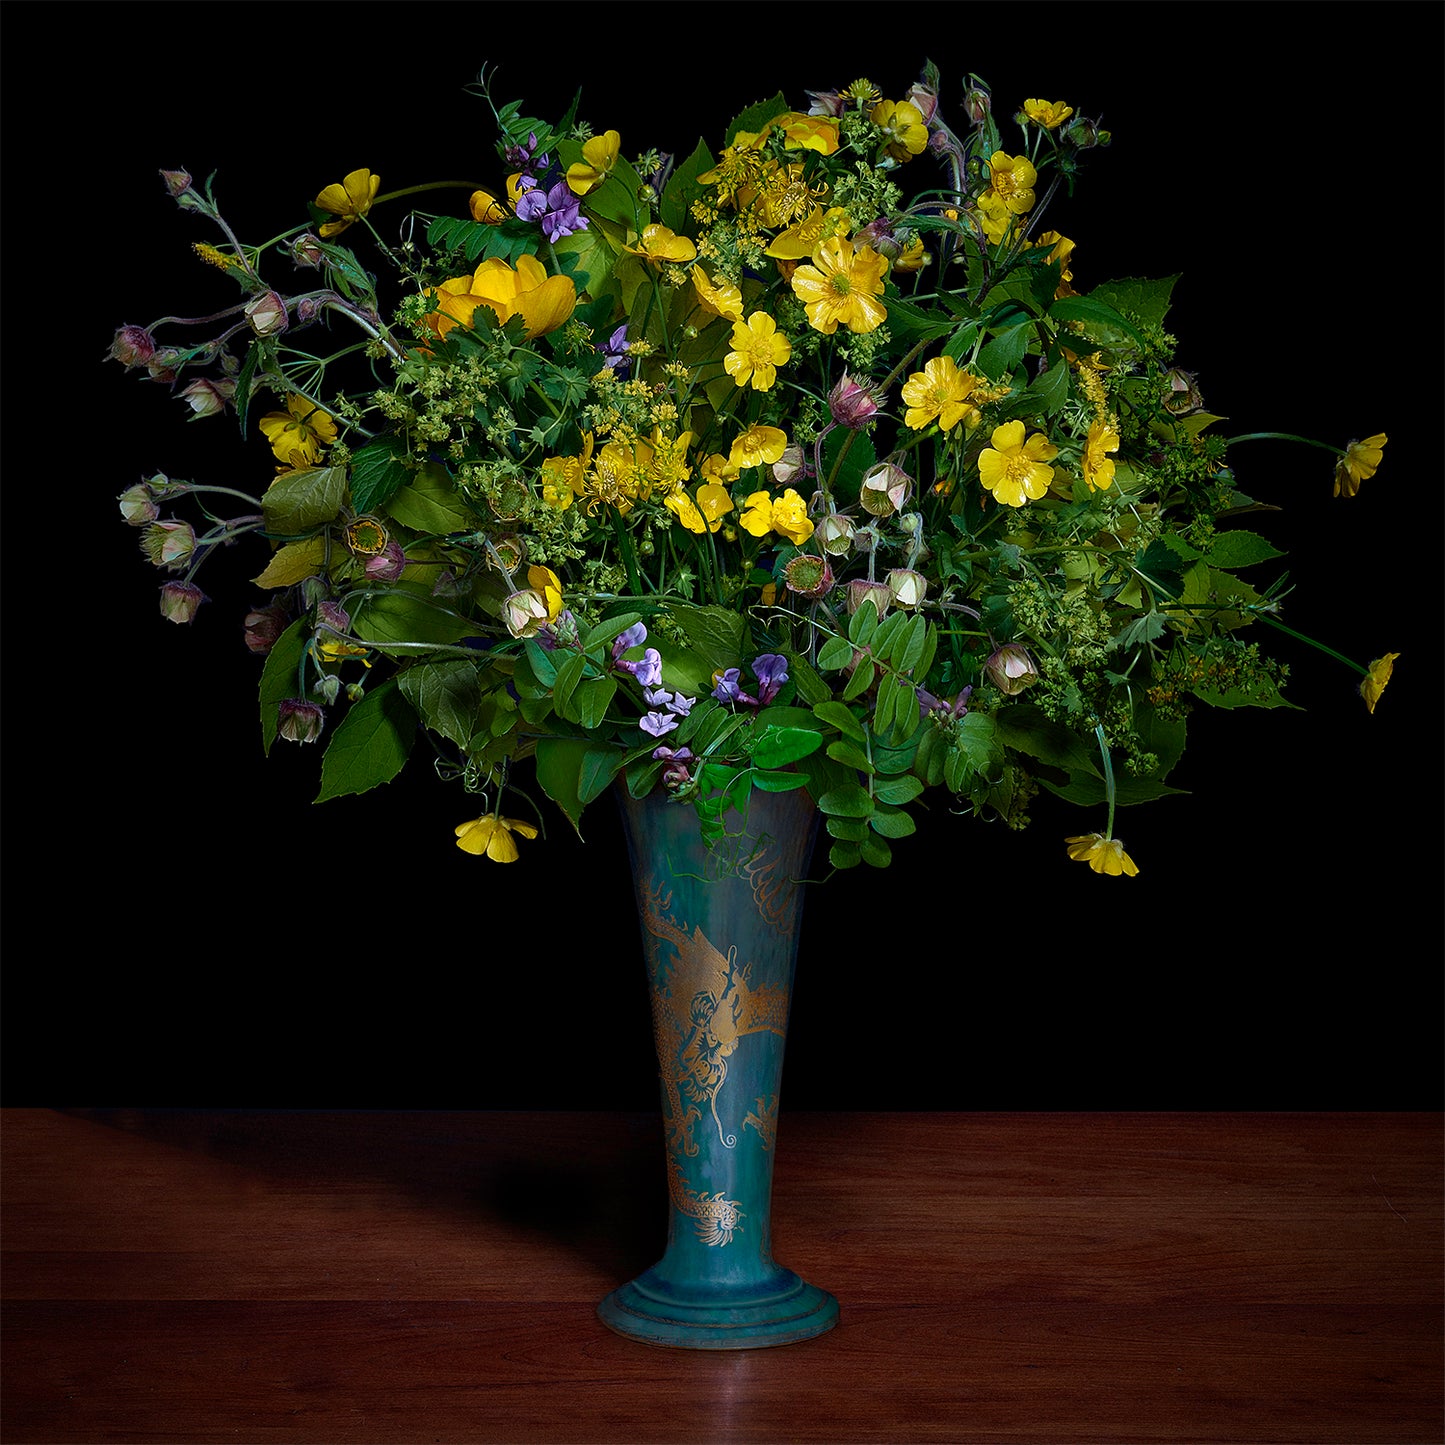 Buttercups and Other Wildflowers in a Japanese Vase